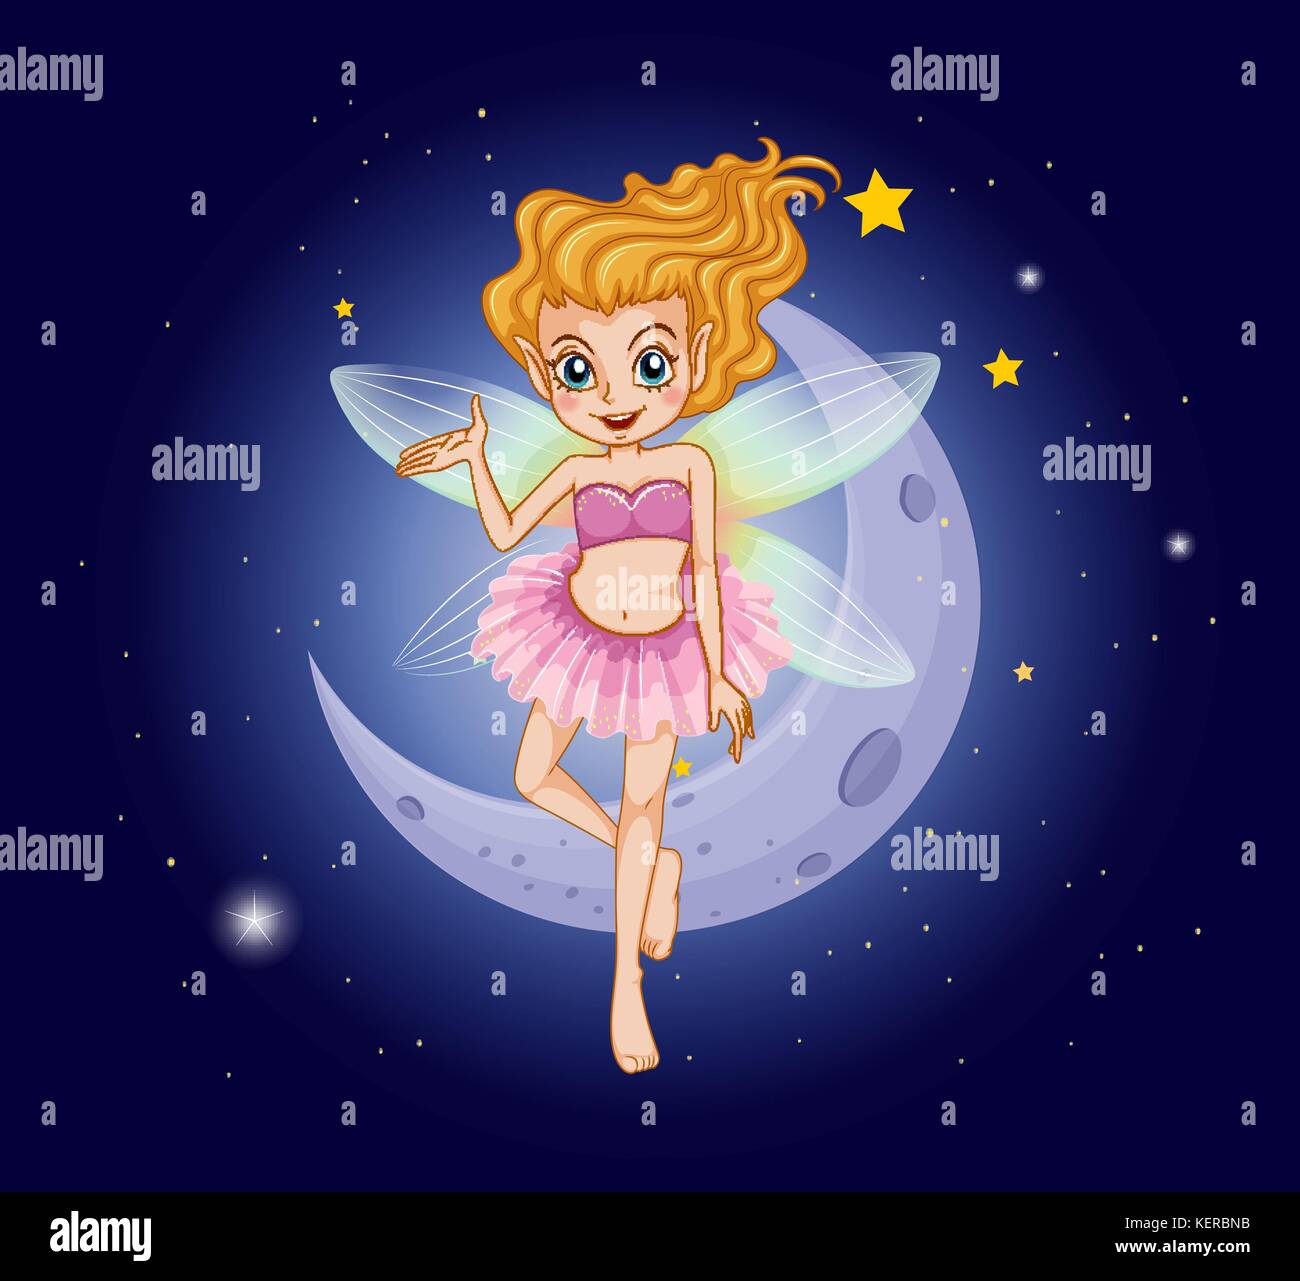 Illustration of a fairy with a pink dress near the moon Stock Vector